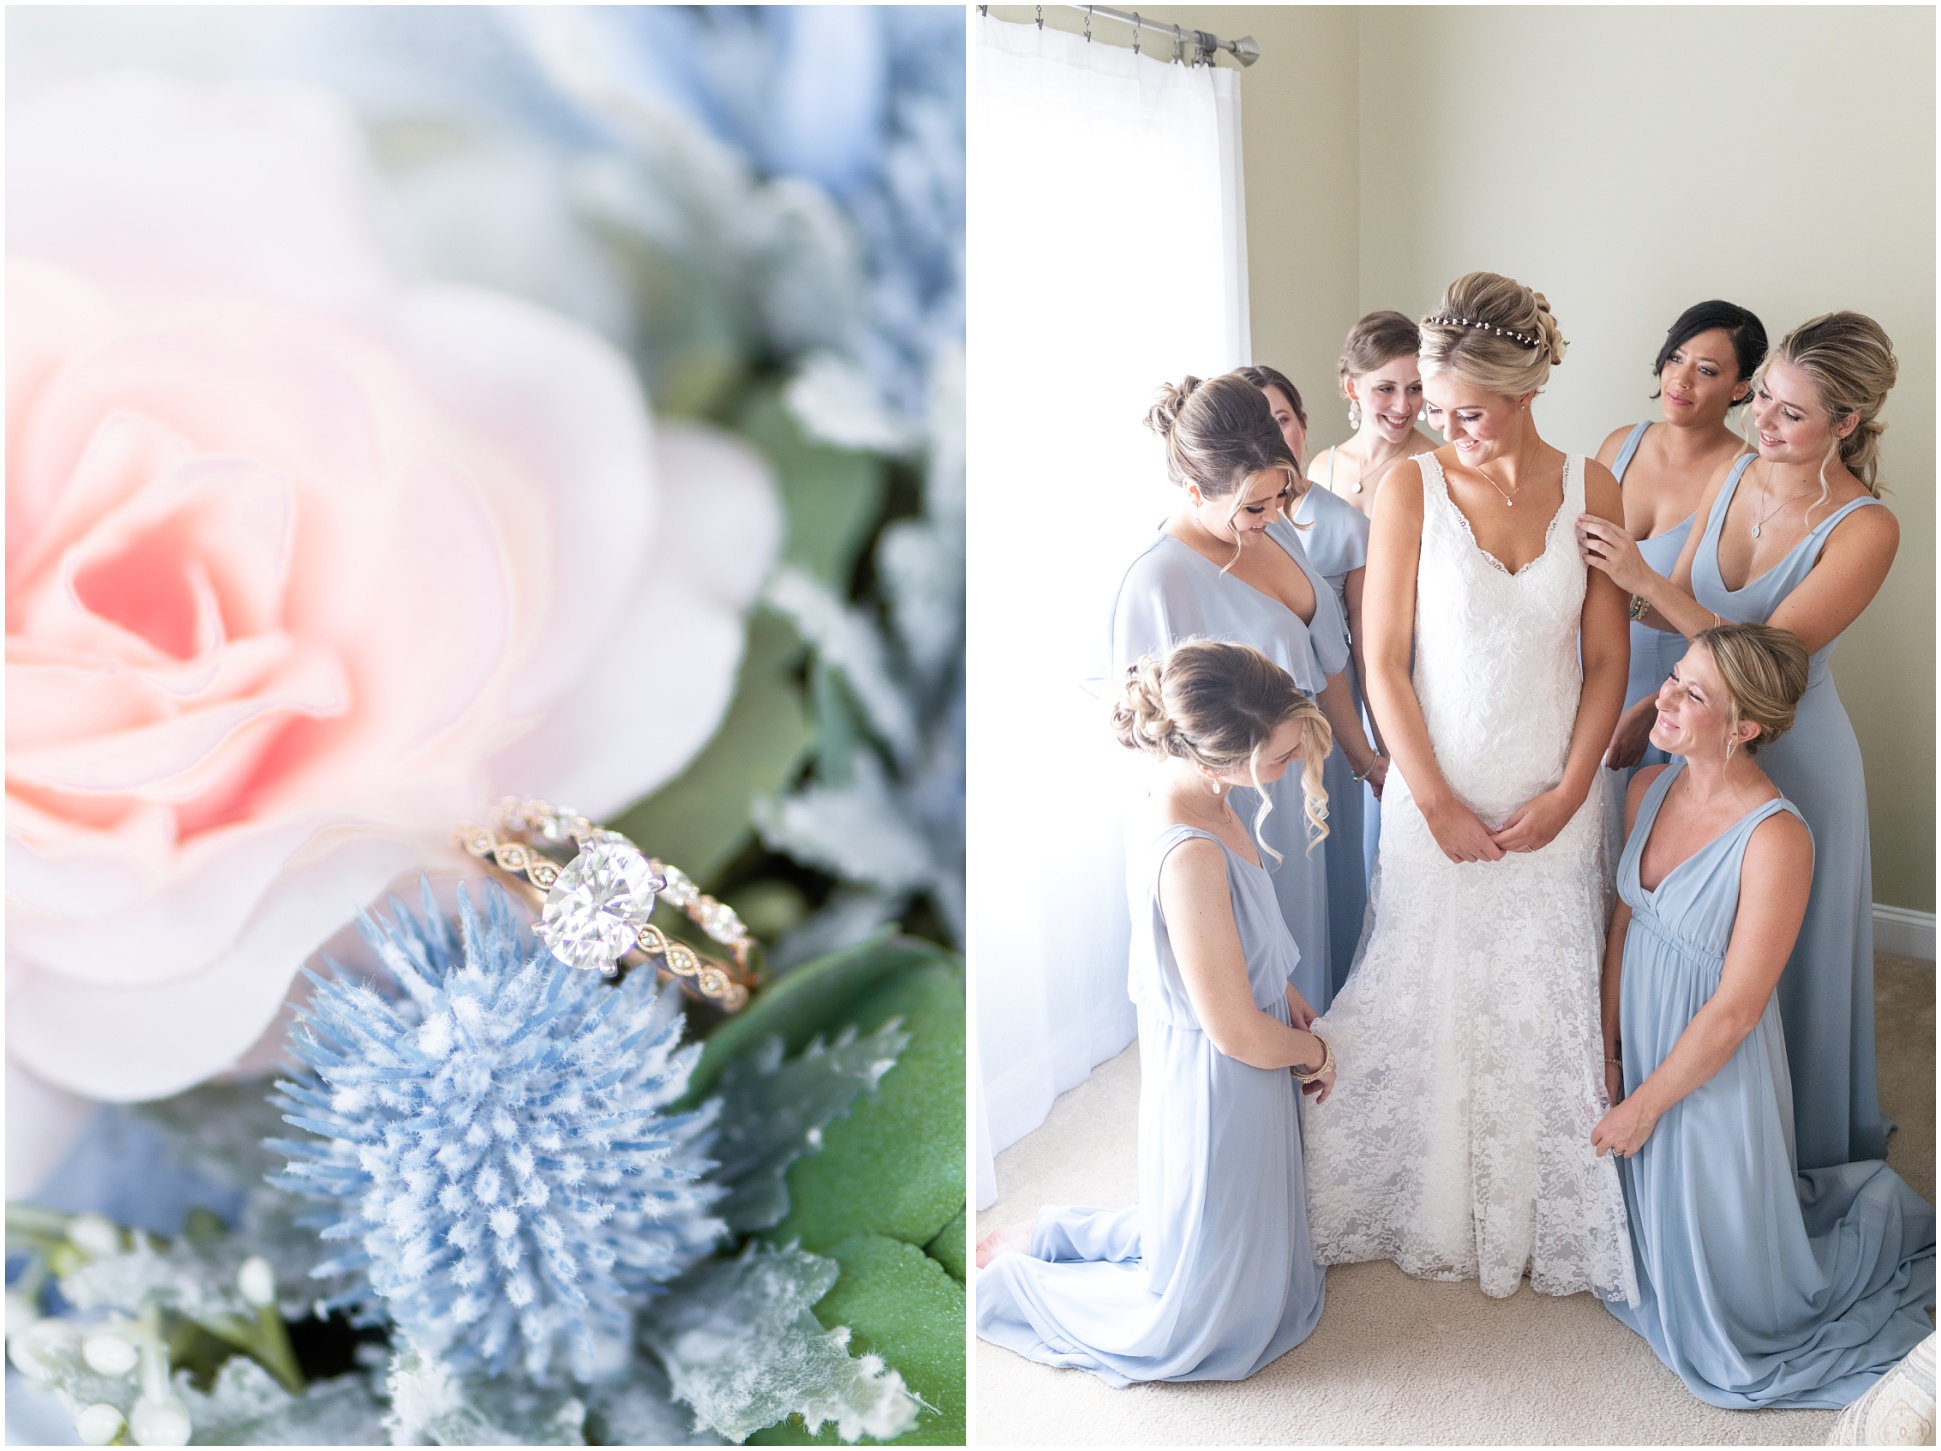 Left Image: Close up shot of the rings in the bouquet; Right Image: bridesmaids helping with bride's dress